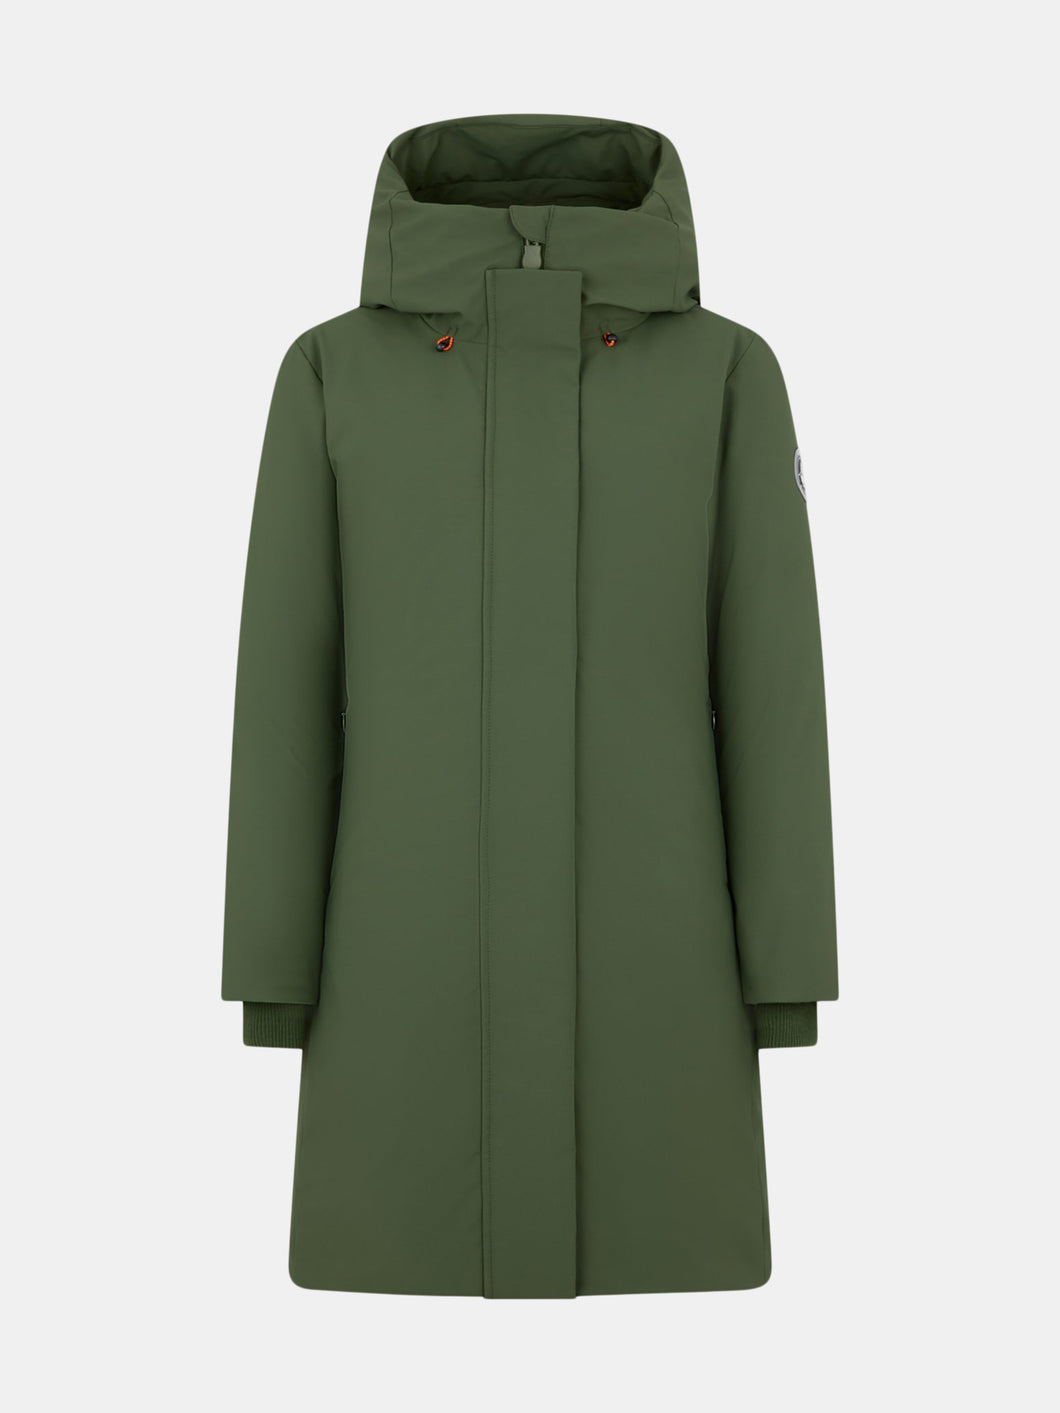 Women's Sienna Hooded Parka with Convertible Hood